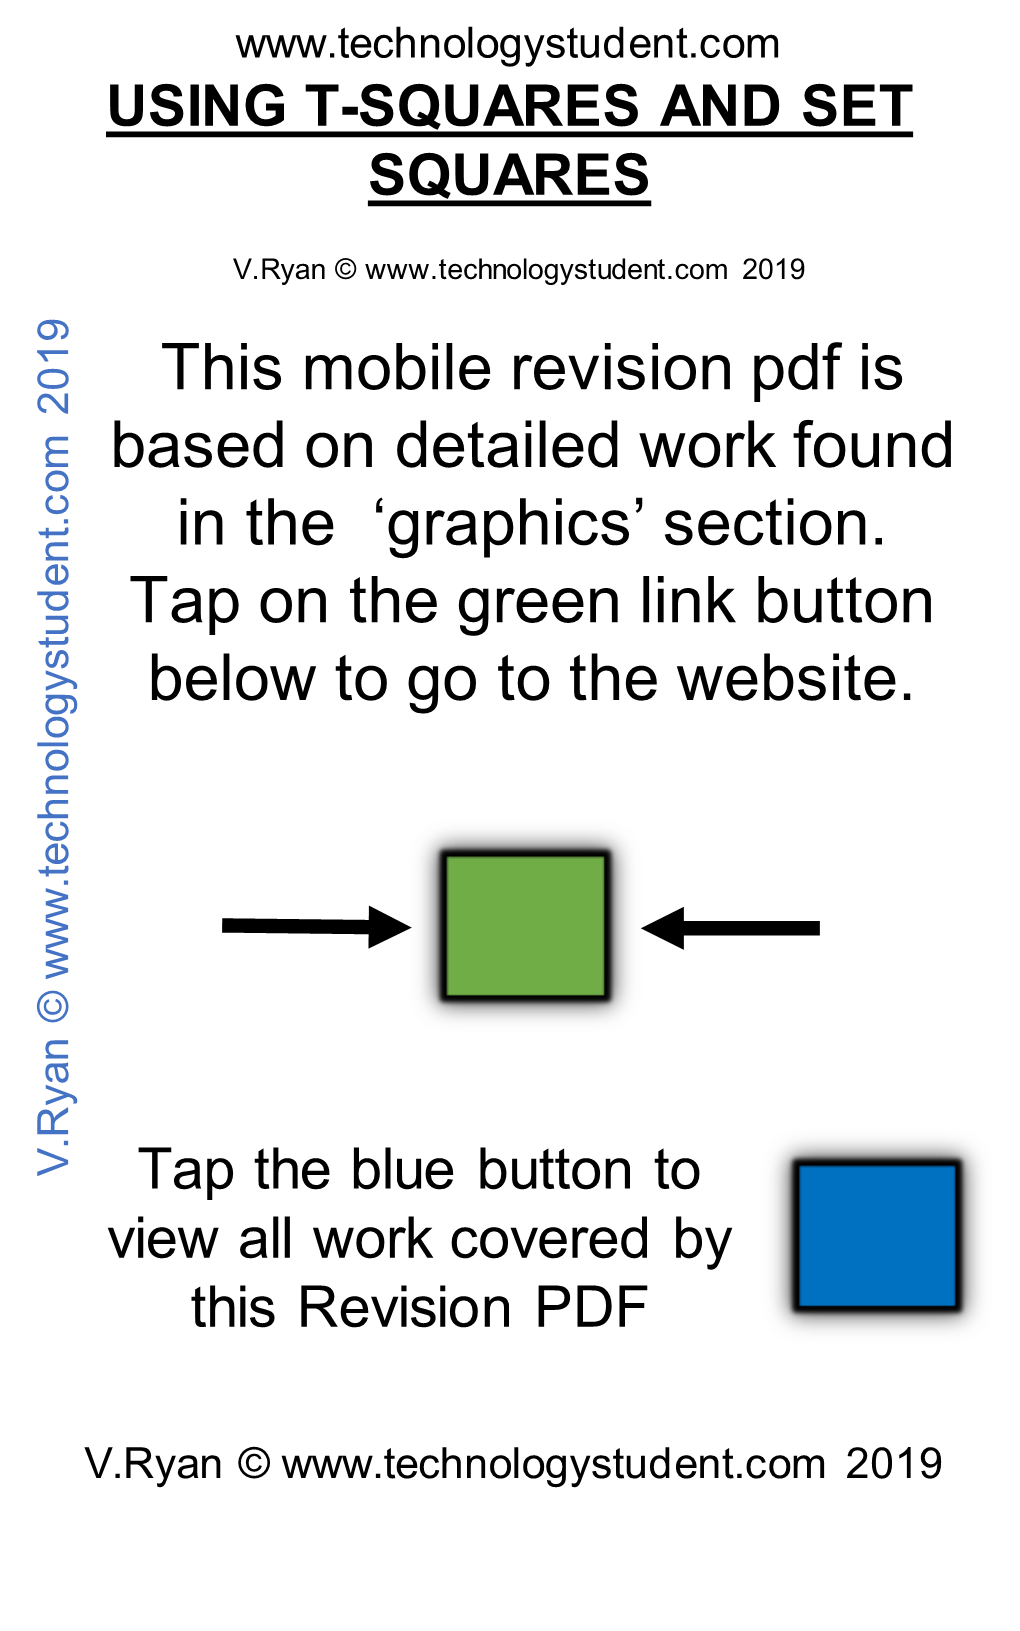 This Mobile Revision Pdf Is Based on Detailed Work Found in the ‘Graphics’ Section